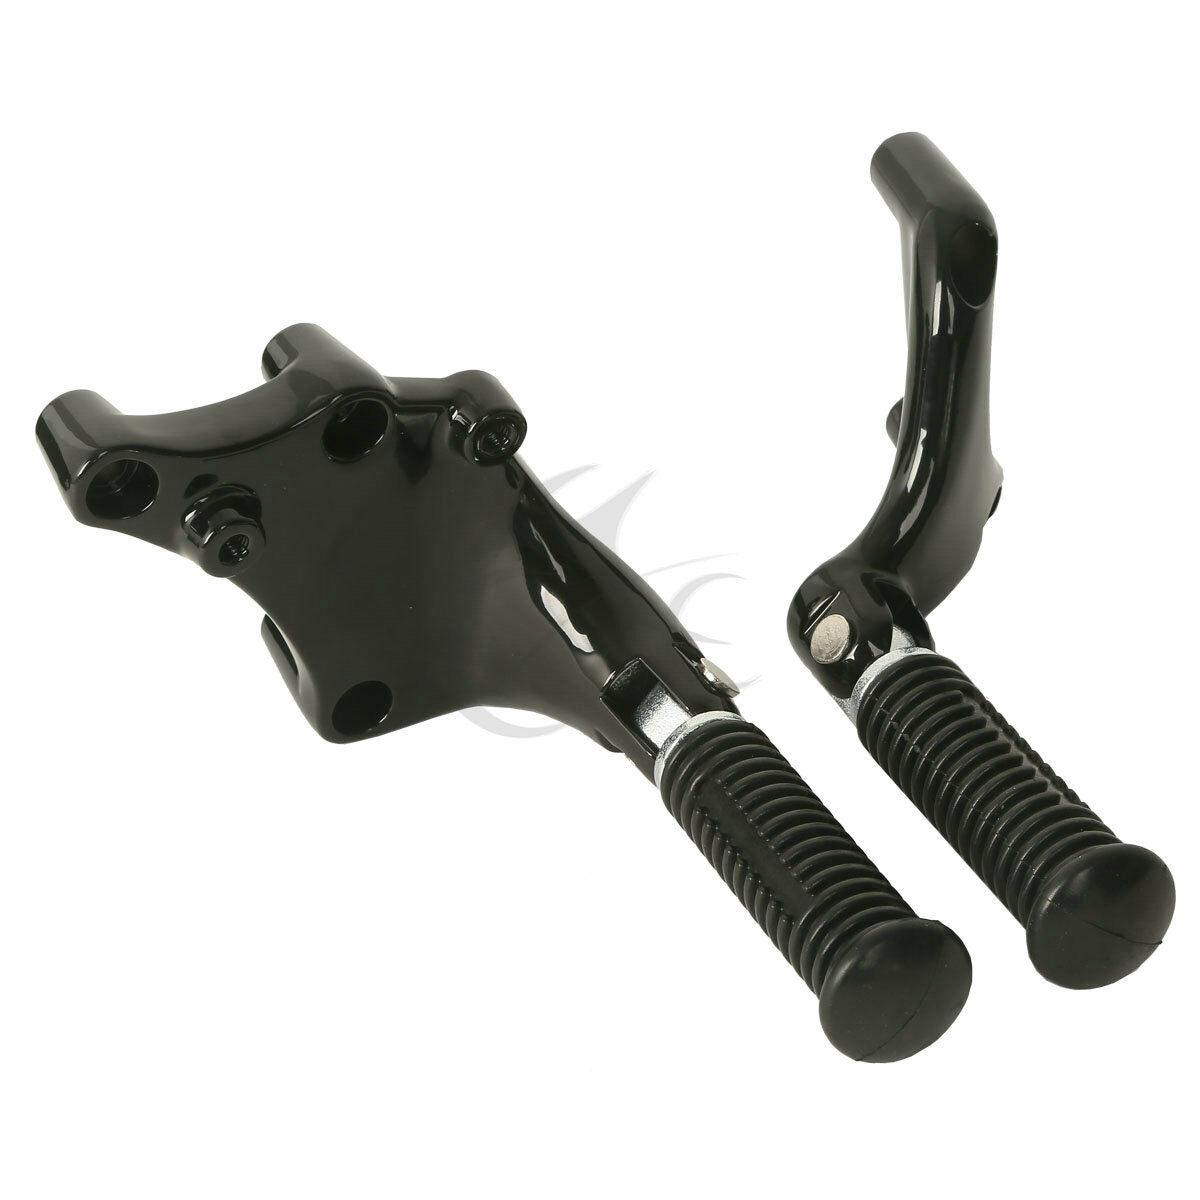 Rear Passenger Foot Pegs Mount Seat Pillion Fit For Harley Sportster XL883 1200 - Moto Life Products